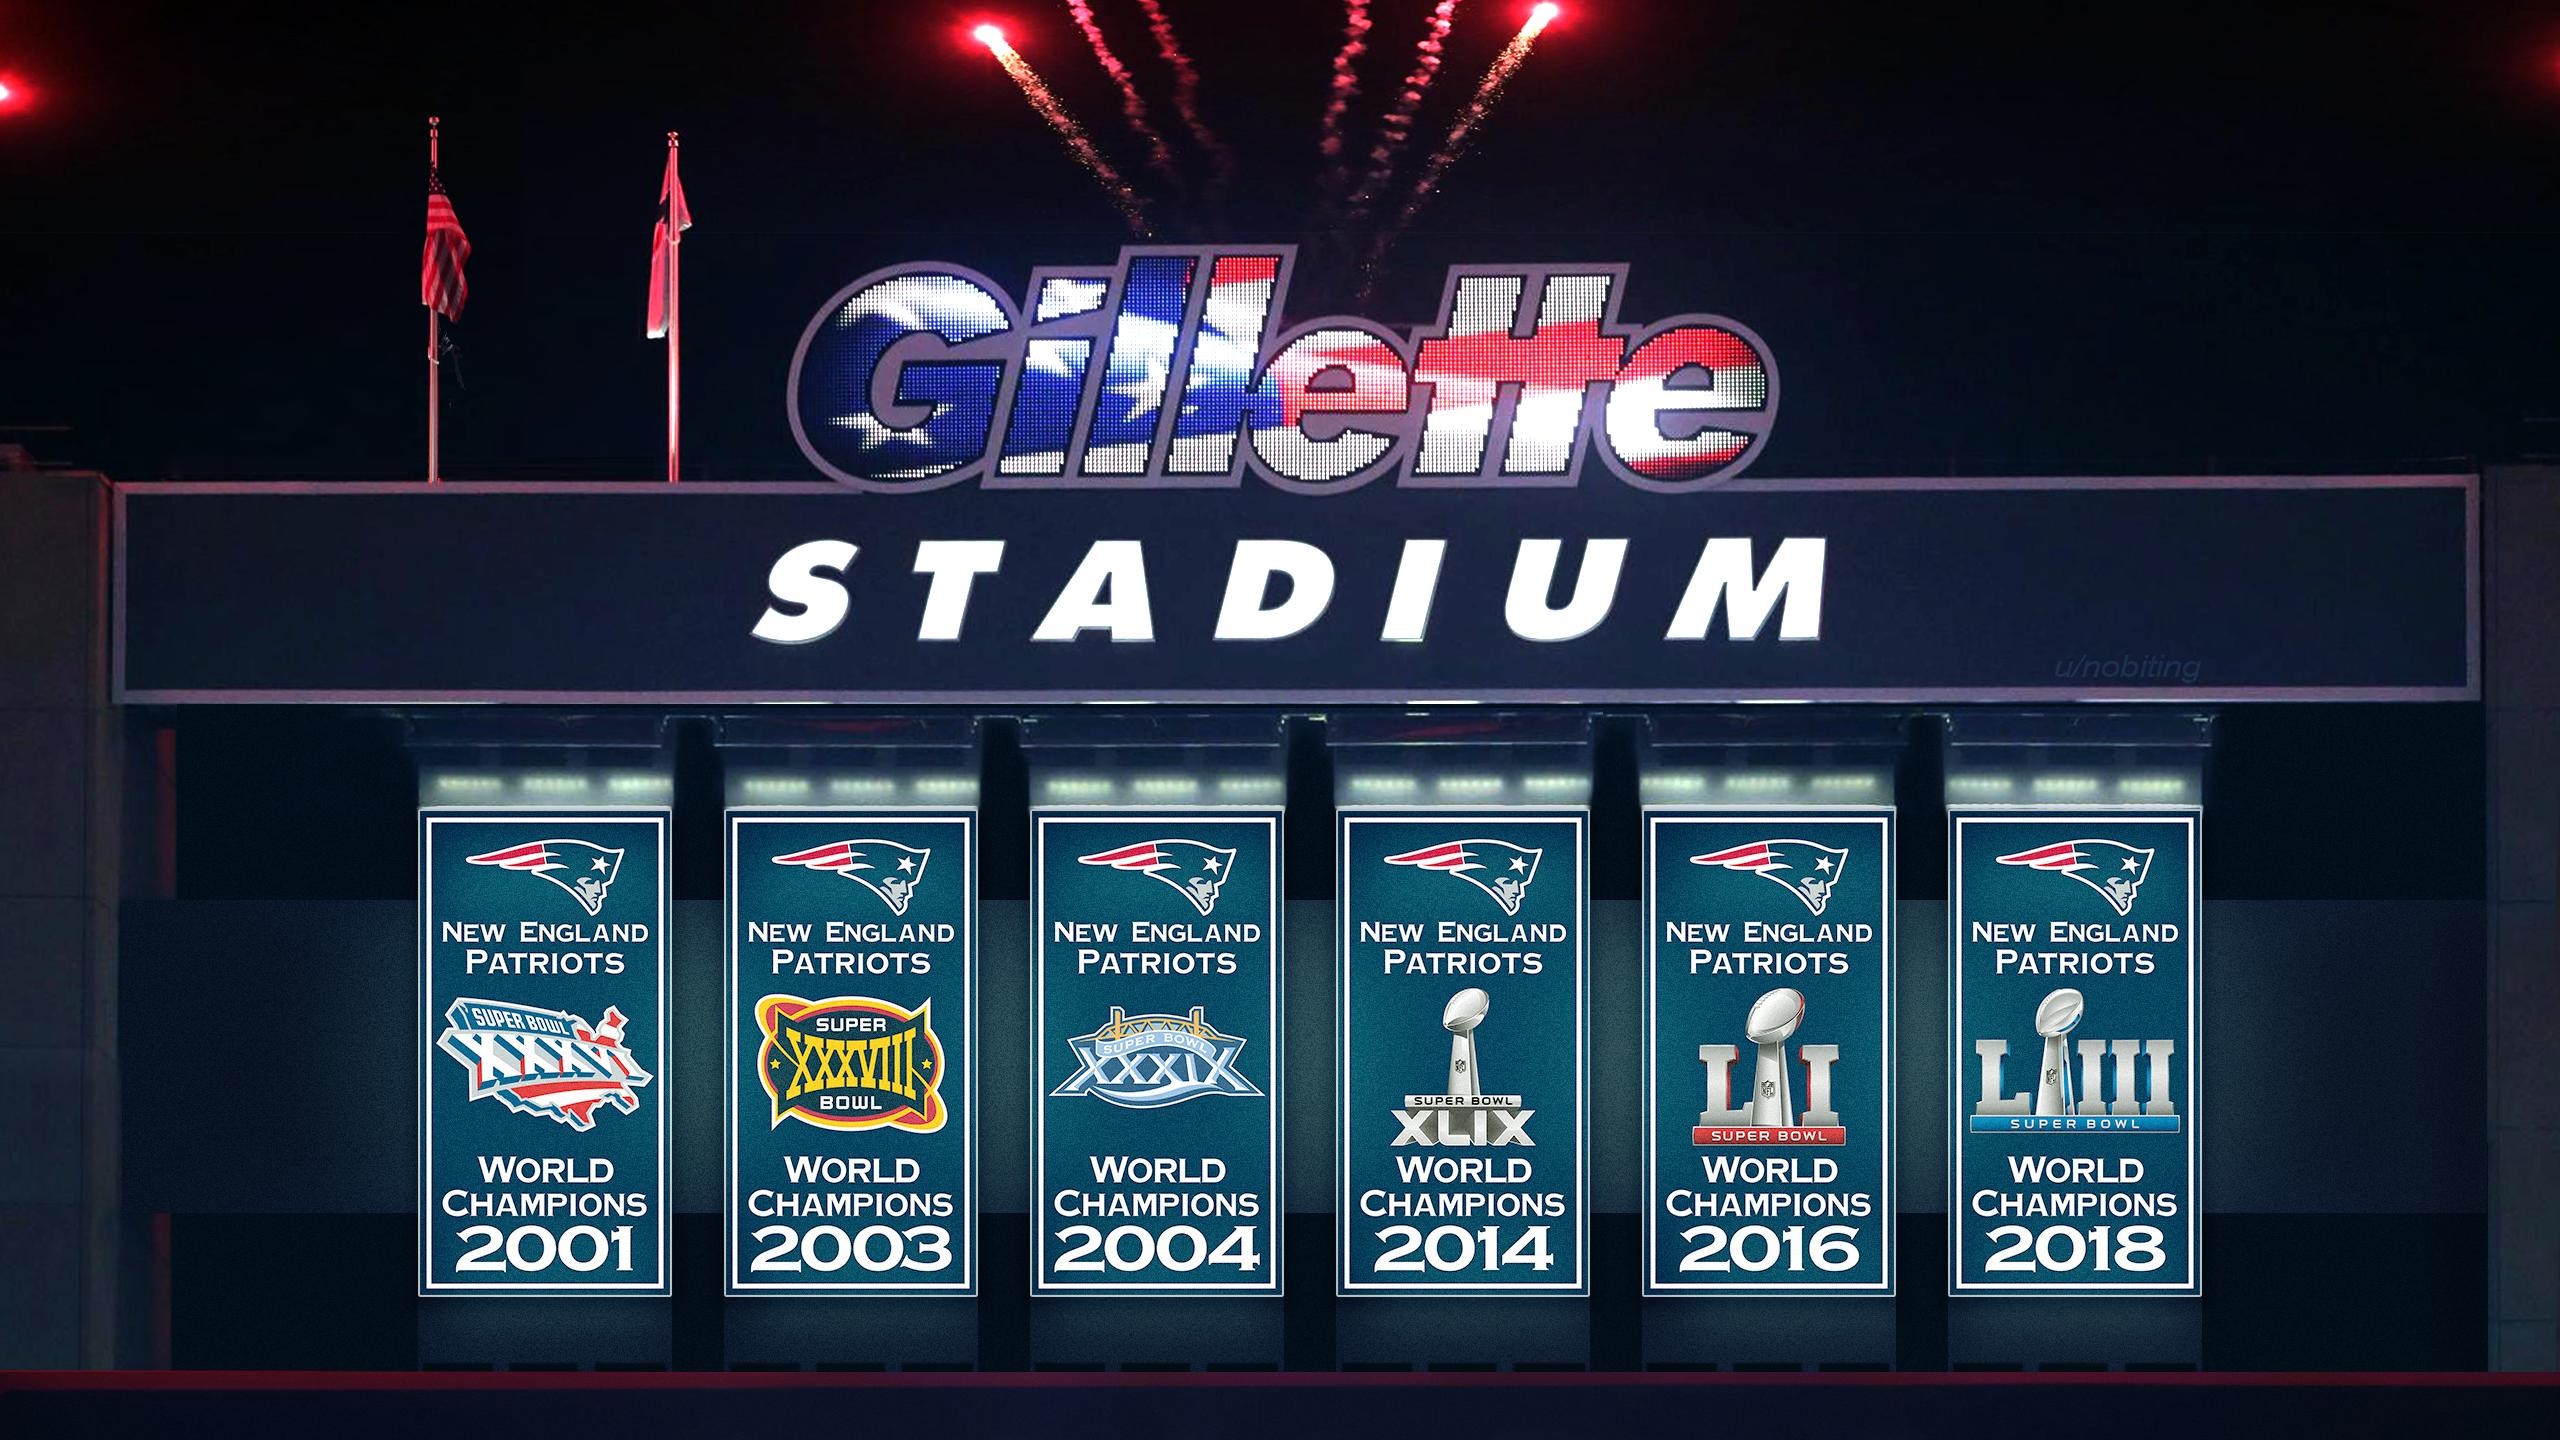 2560x1440 UPDATED GILLETTE STADIUM SUPER BOWL BANNERS (6X) (Photoshop by me, feel  free to use as wallpaper) ...